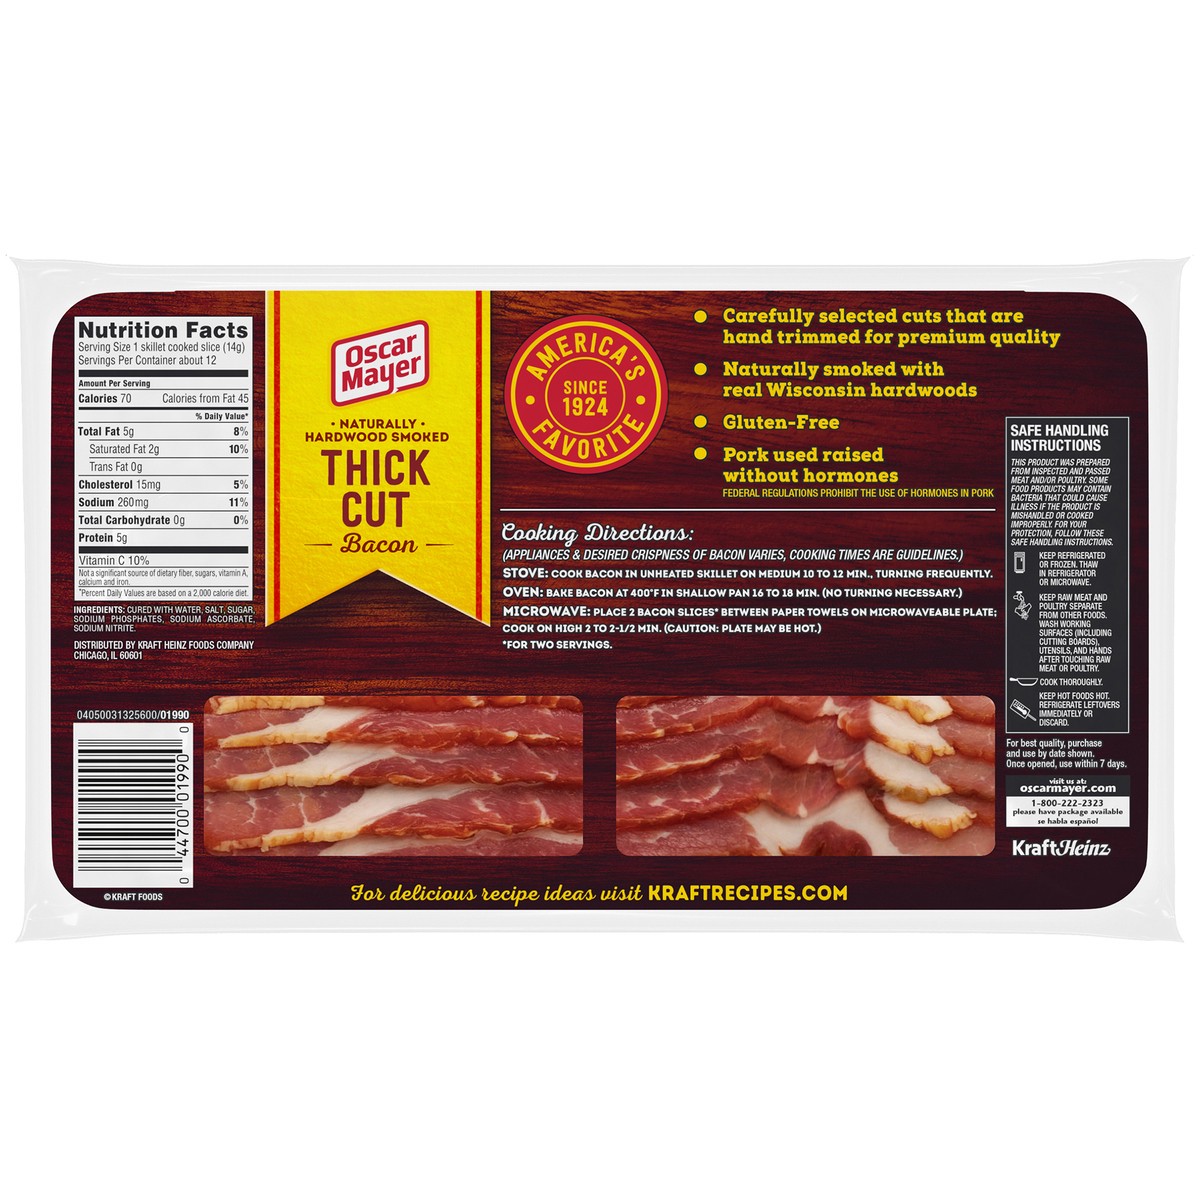 slide 15 of 15, Oscar Mayer Naturally Hardwood Smoked Thick Cut Bacon, 16 oz Pack, 11-13 slices, 16 oz